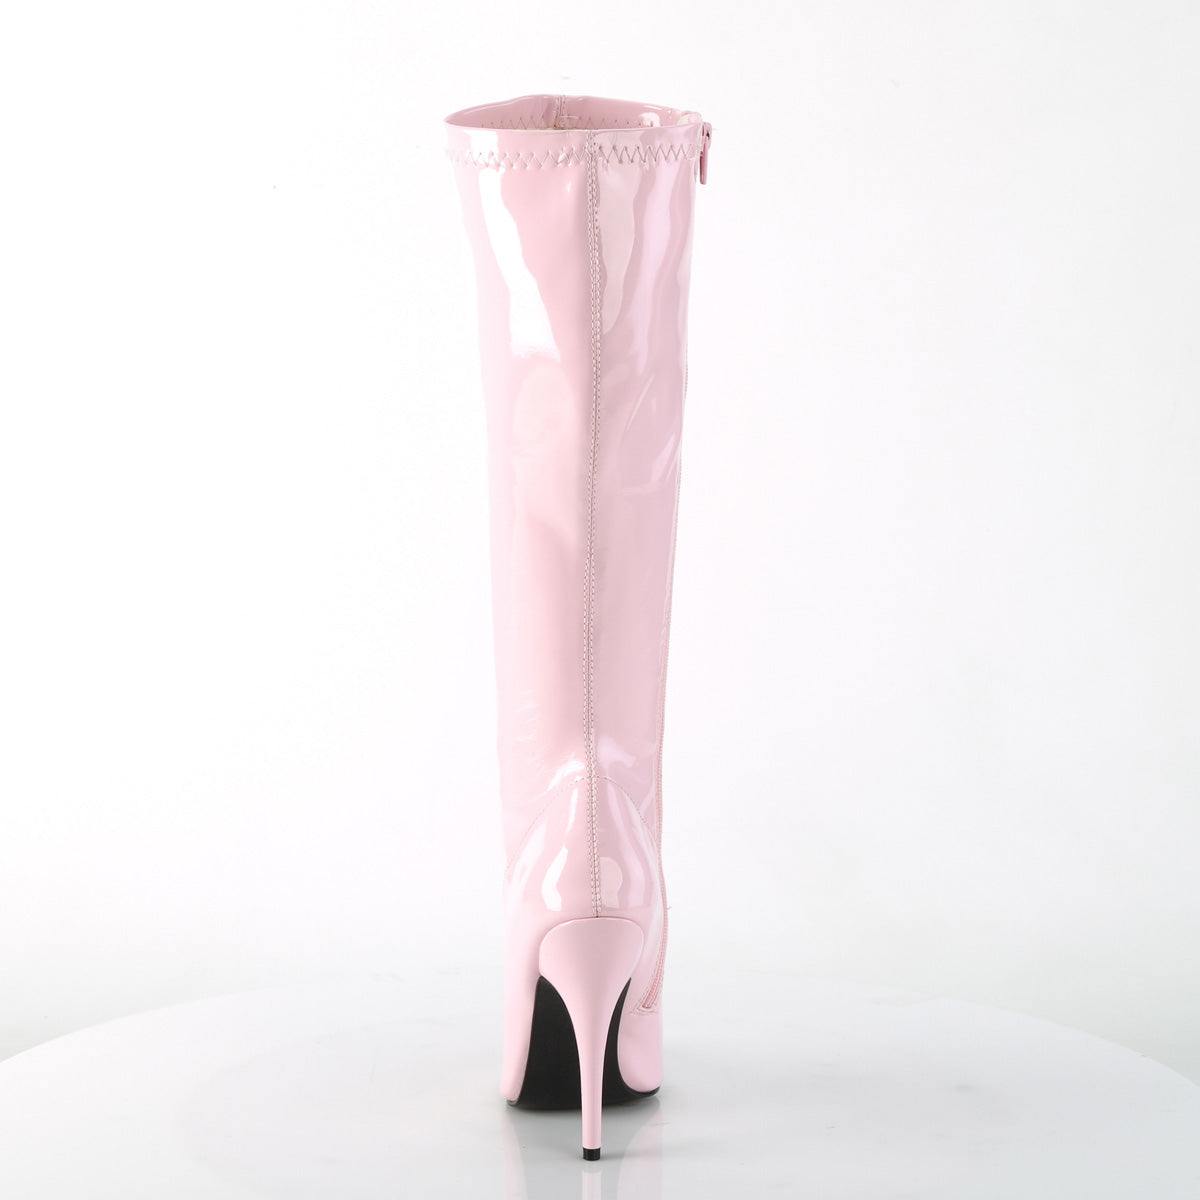 SEDUCE-2000 Pleaser B Pink Stretch Patent Single Sole Shoes [Sexy Thigh High Boots]